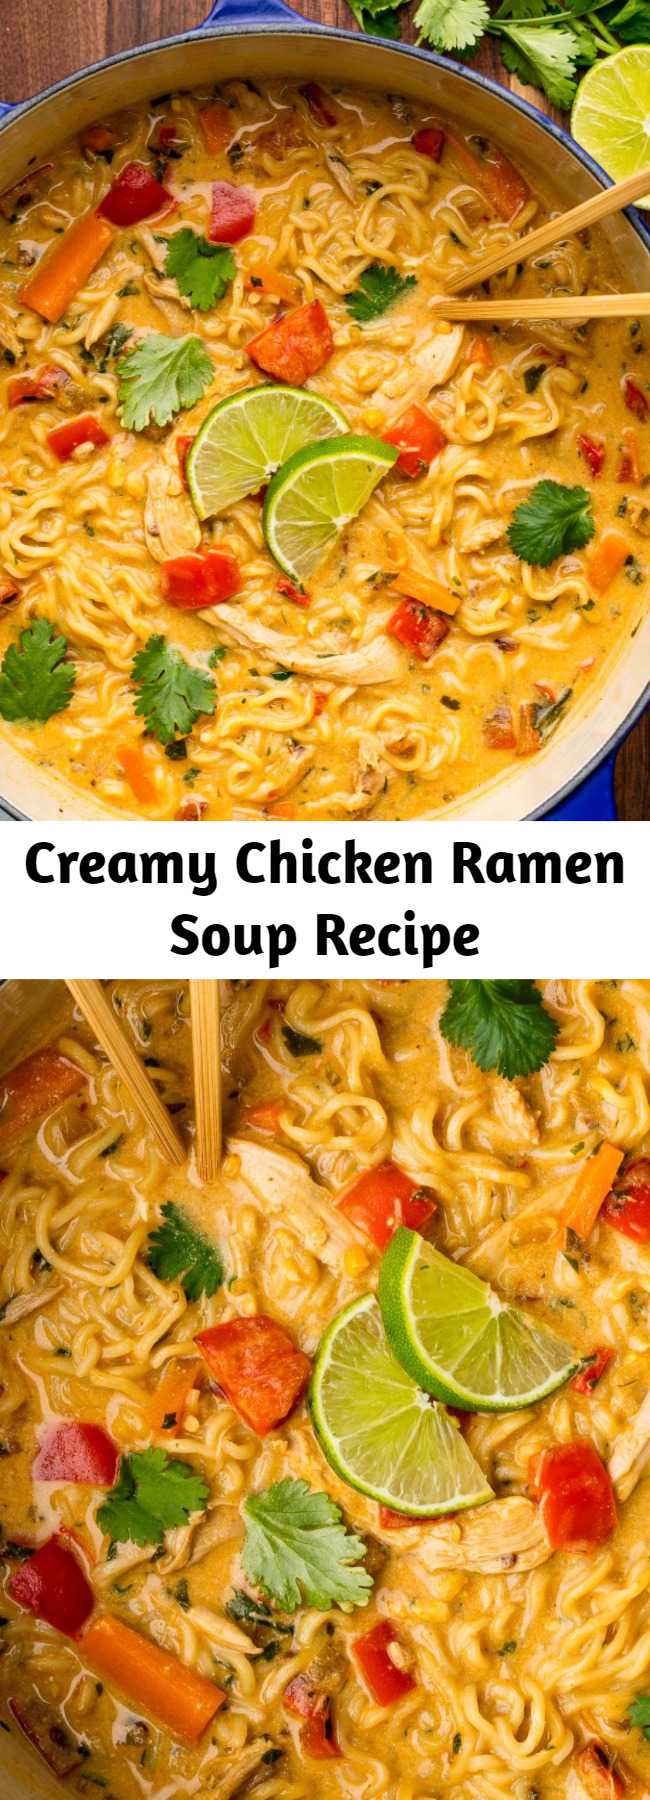 Creamy Chicken Ramen Soup Recipe - Looking for an easy ramen chicken noodle? This Creamy Chicken Ramen Soup is the best. This recipe packs a flavorful punch and then some! You get some spiciness from the curry powder, a rich creaminess from the coconut milk and if you top that of with a squeeze of lime, you have a chicken soup that will ambush your taste buds.